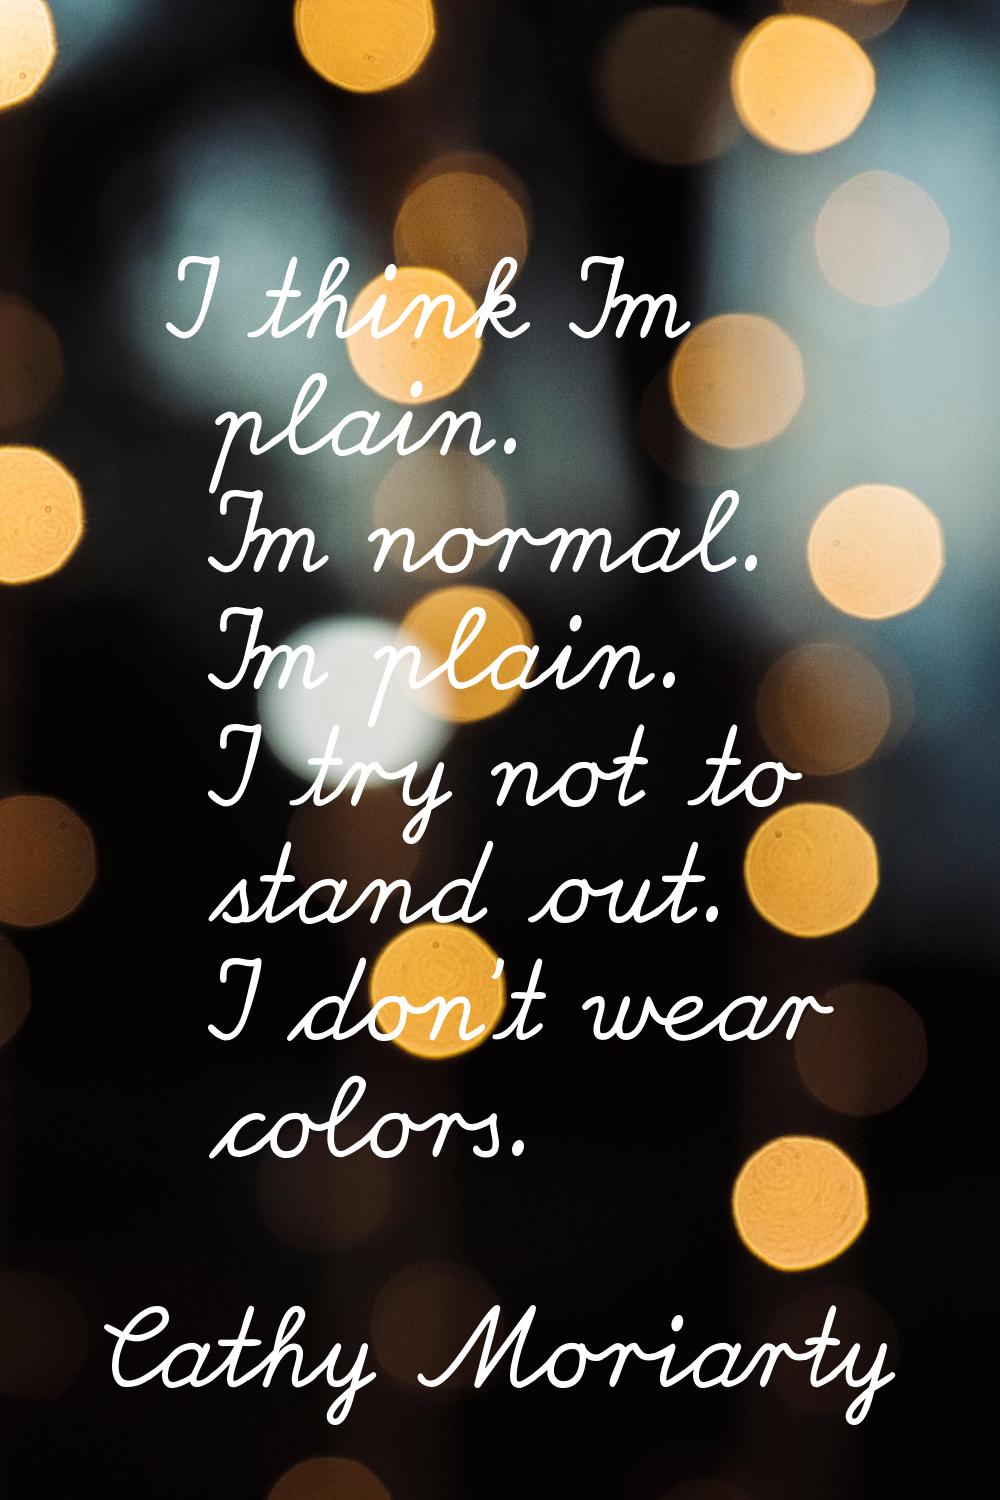 I think I'm plain. I'm normal. I'm plain. I try not to stand out. I don't wear colors.